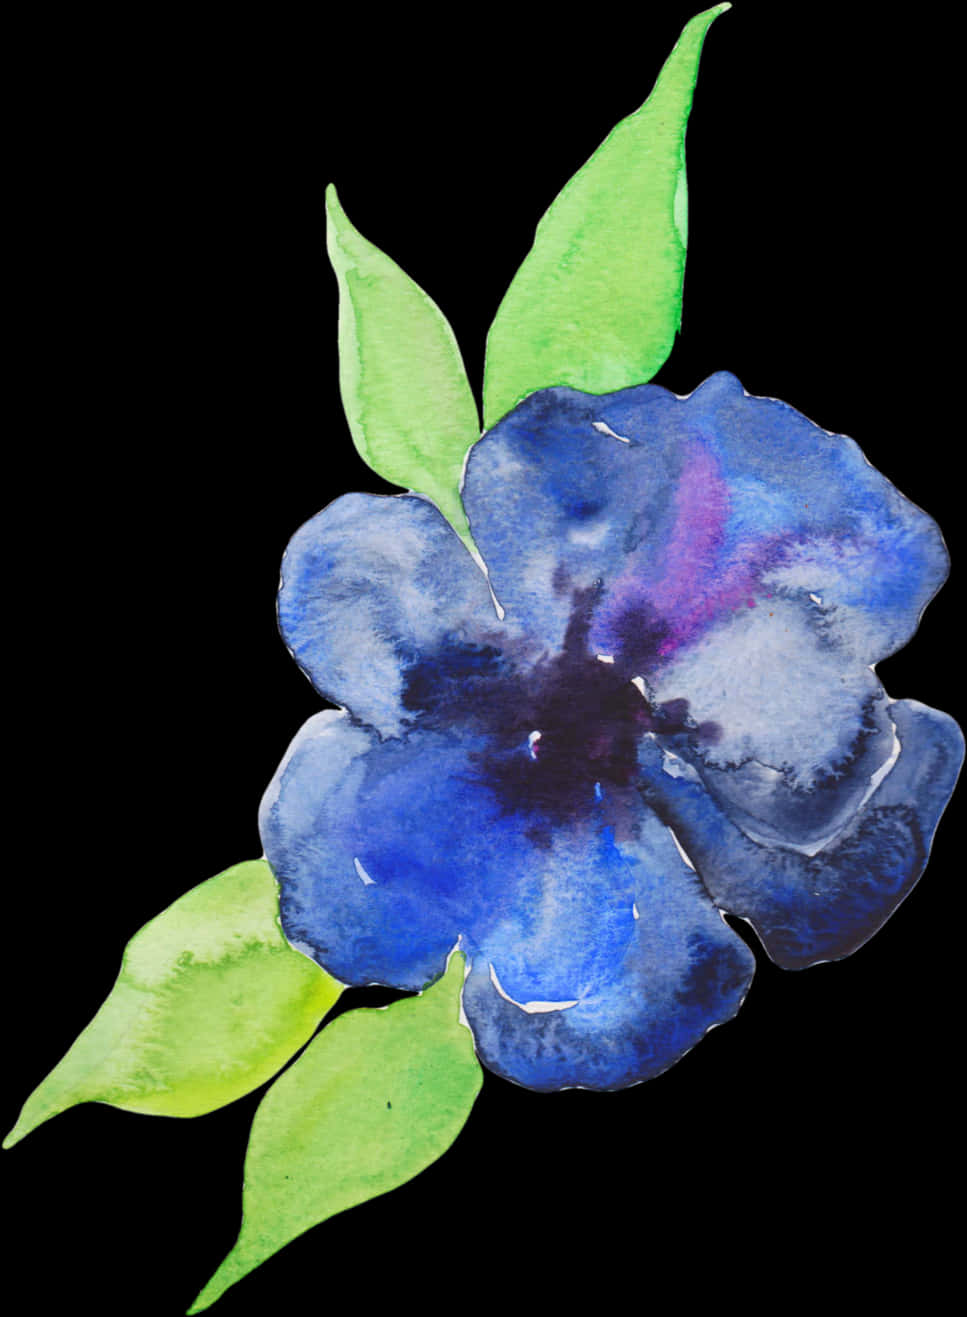 A Blue Flower With Green Leaves